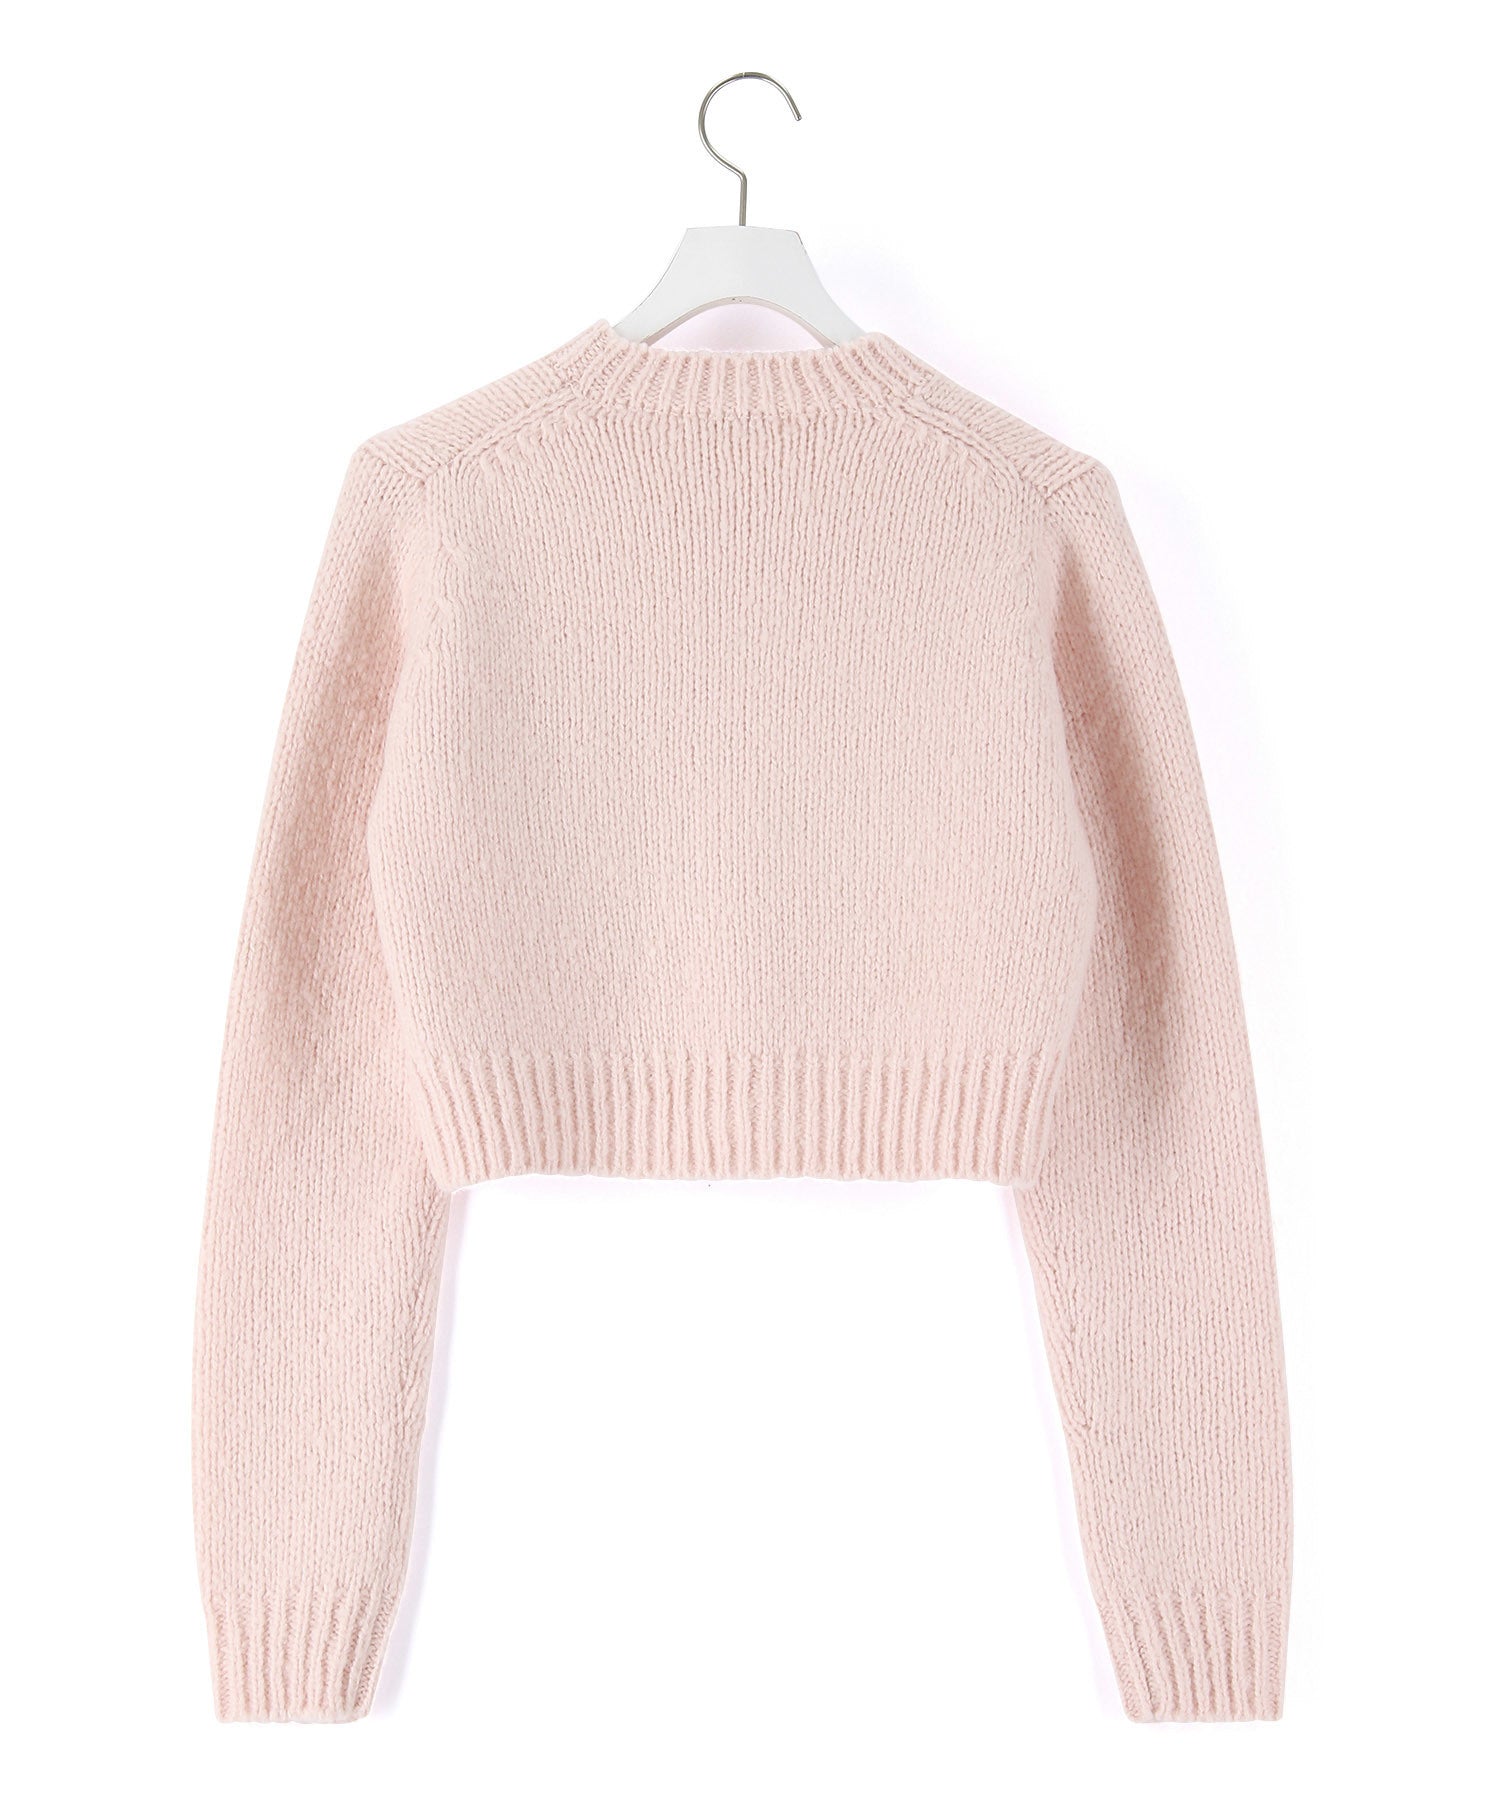 AURALEE】WOOL BABY CAMEL BRUSHED YARN KNIT SHORT PULL OVER ｜ ADAM ...